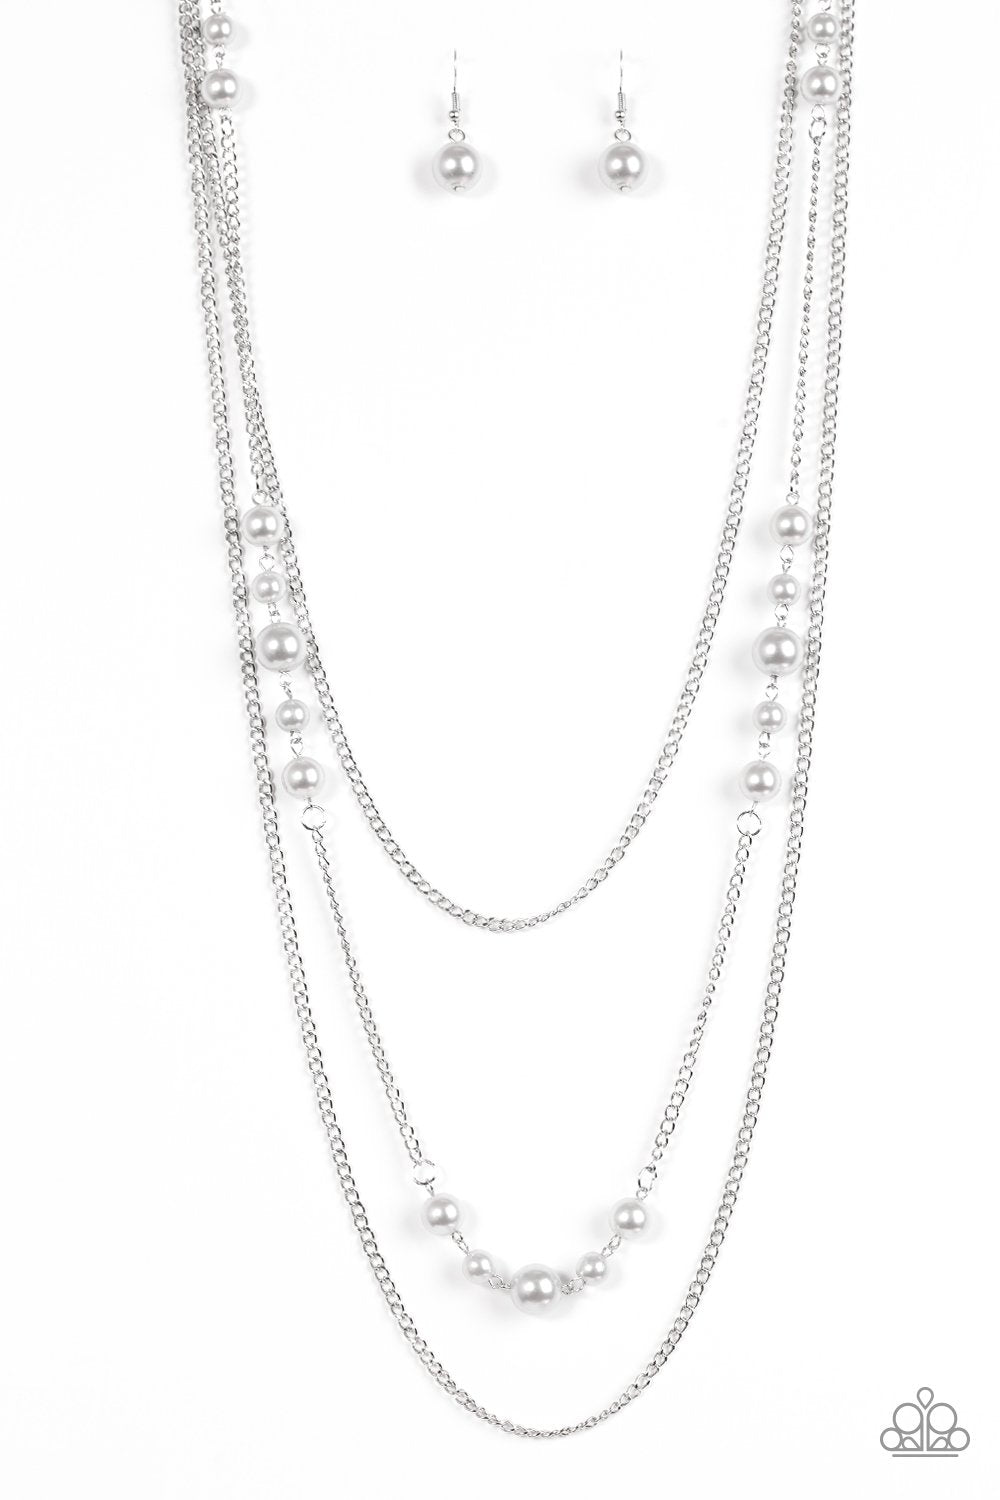 Diva Dilemma Silver Pearl and Chain Necklace - Paparazzi Accessories-CarasShop.com - $5 Jewelry by Cara Jewels